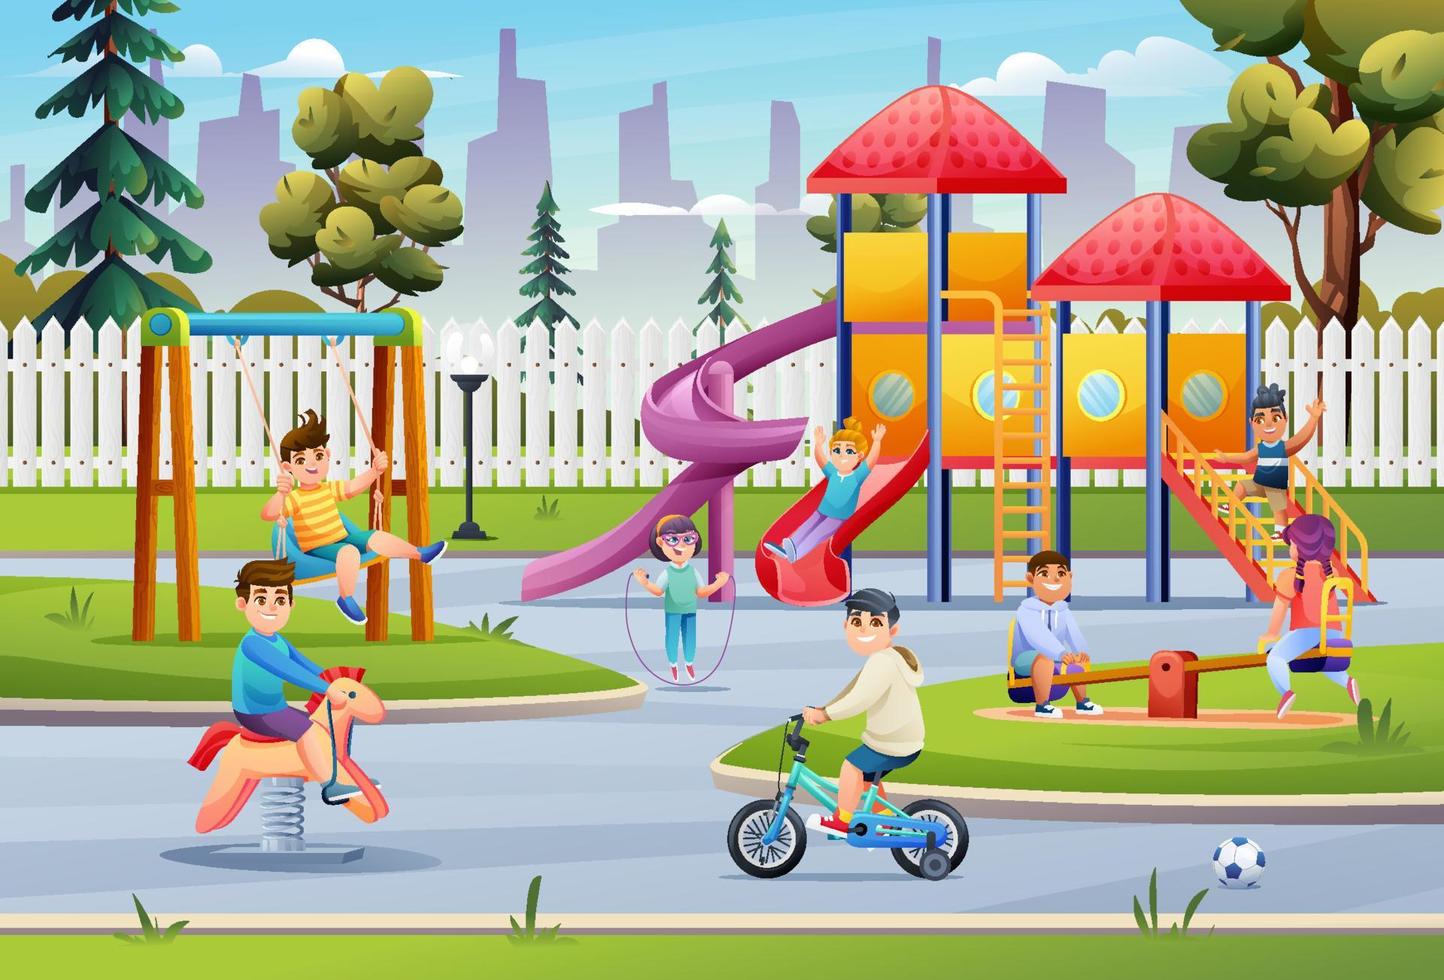 Children playing on playground with slide, swing, bicycle and seesaw cartoon illustration vector